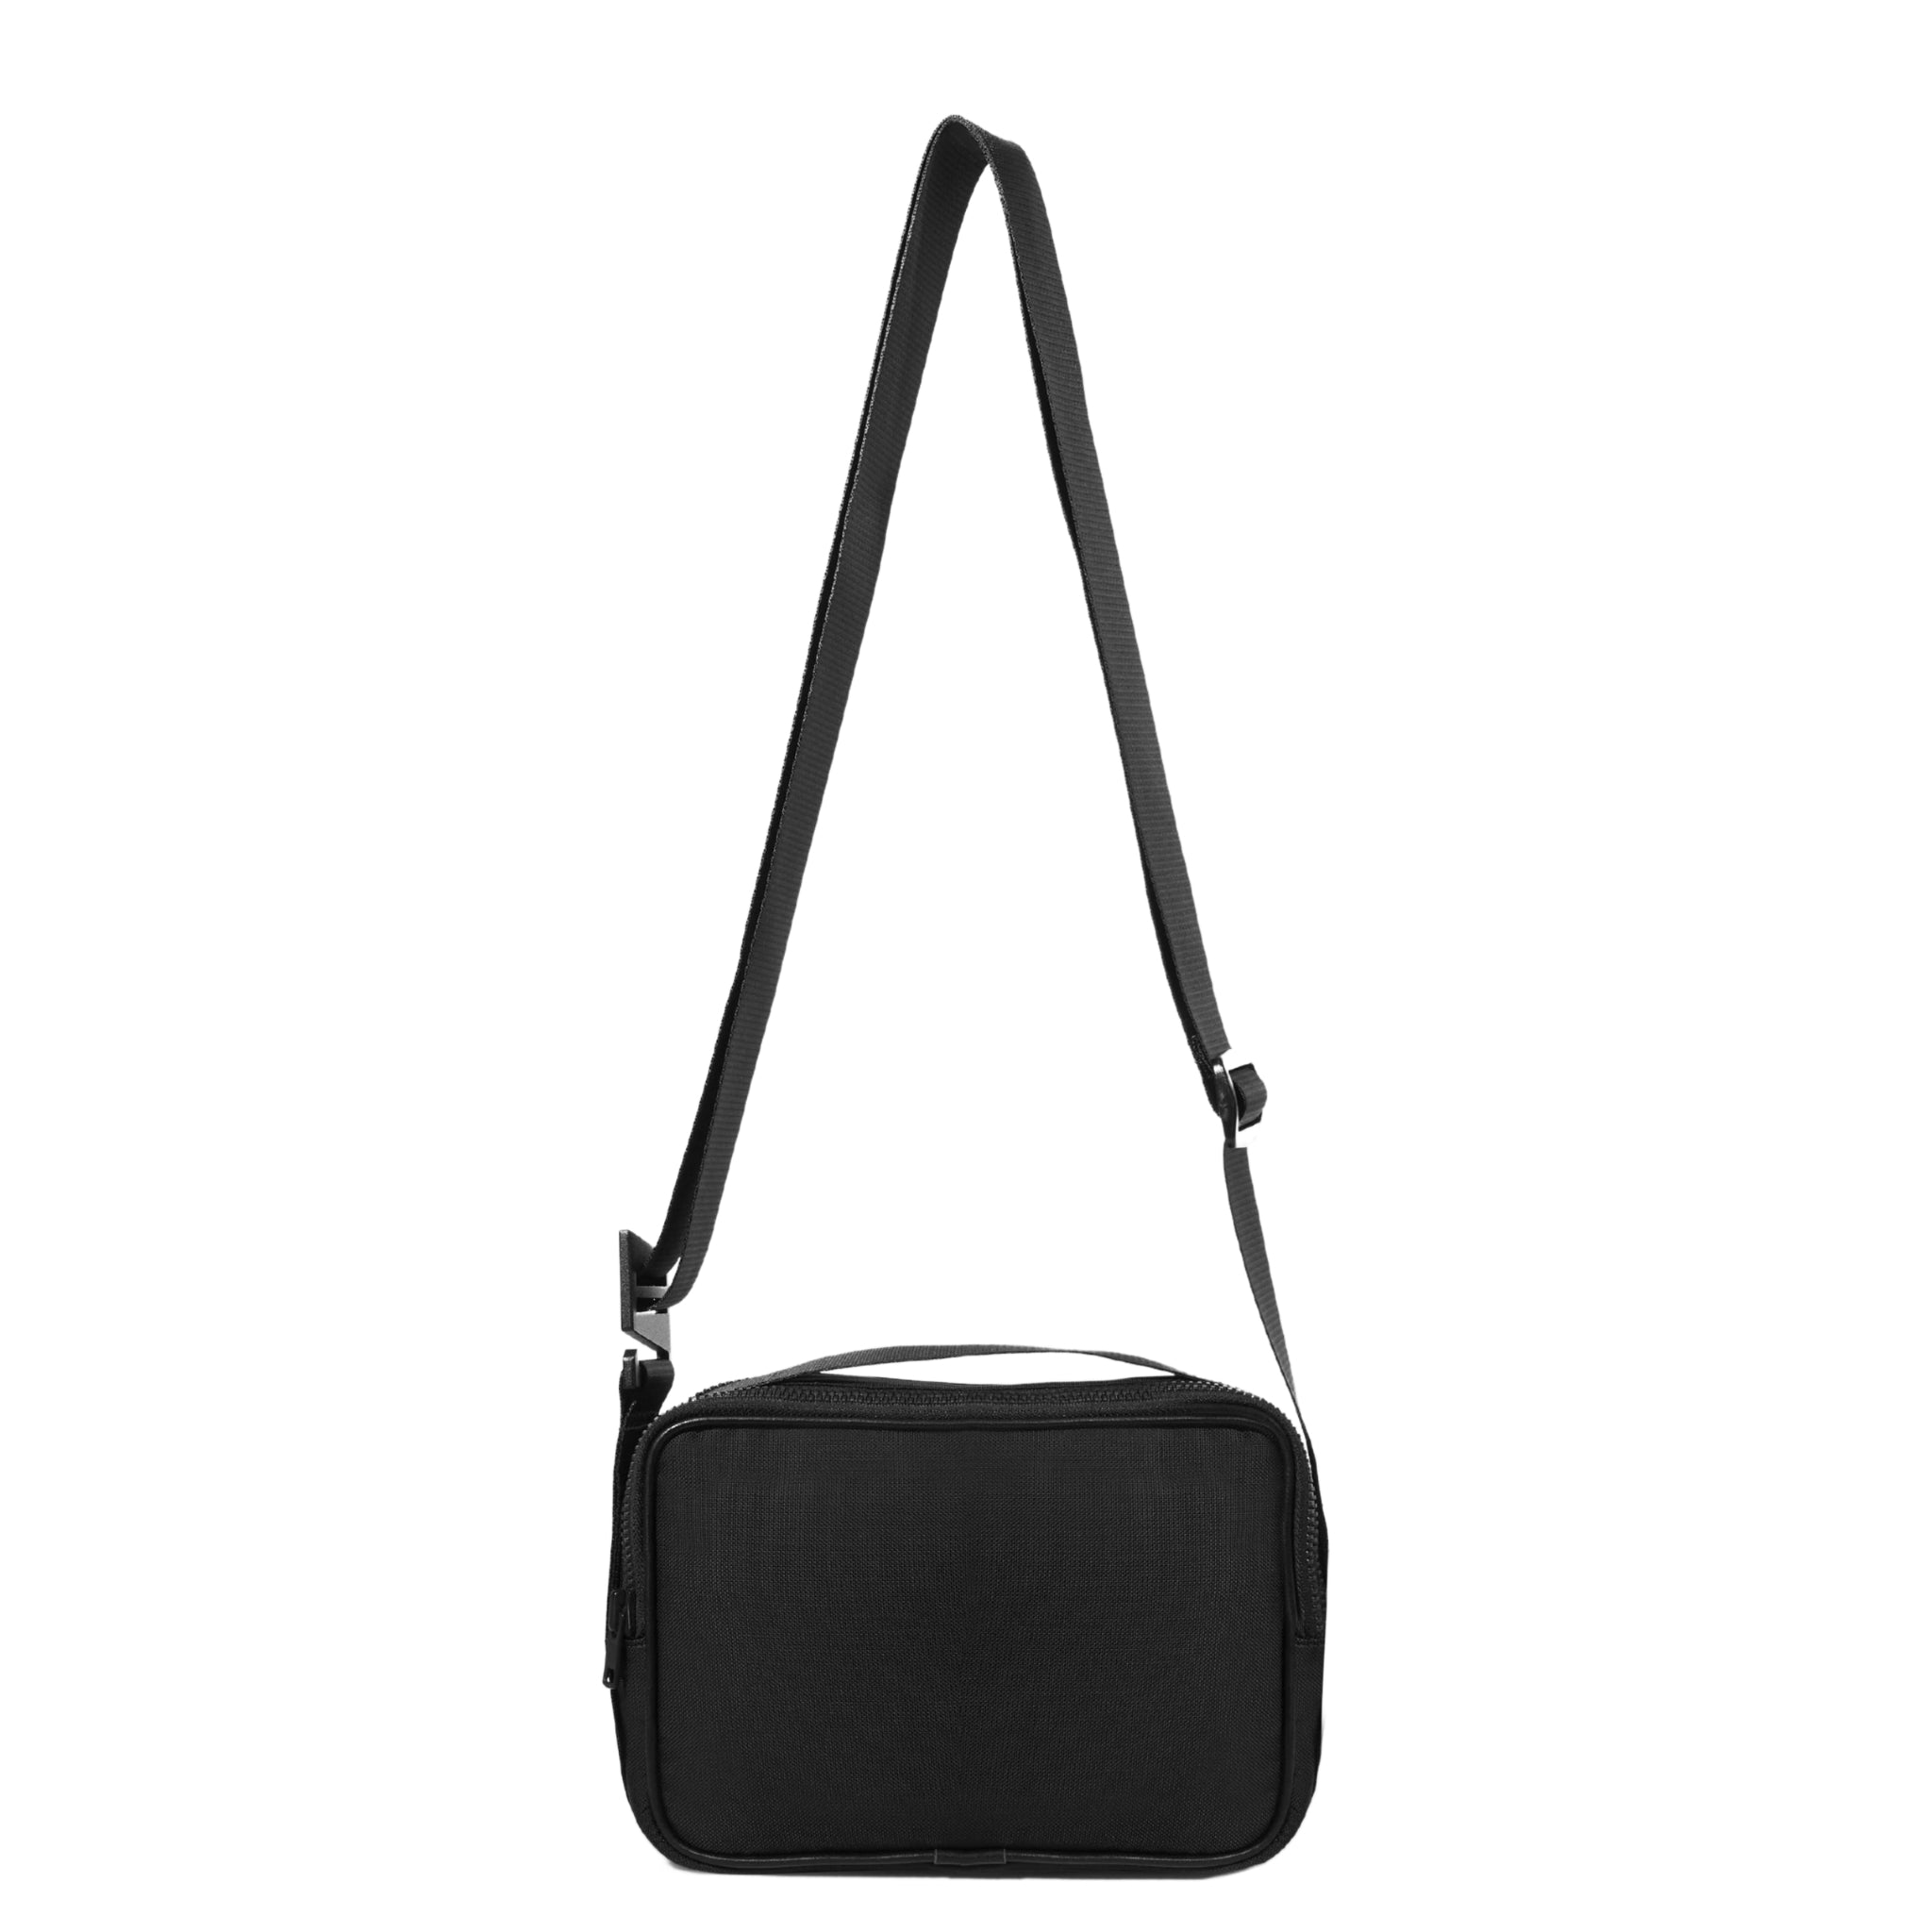 goodall bag in black econyl front centre on a white background